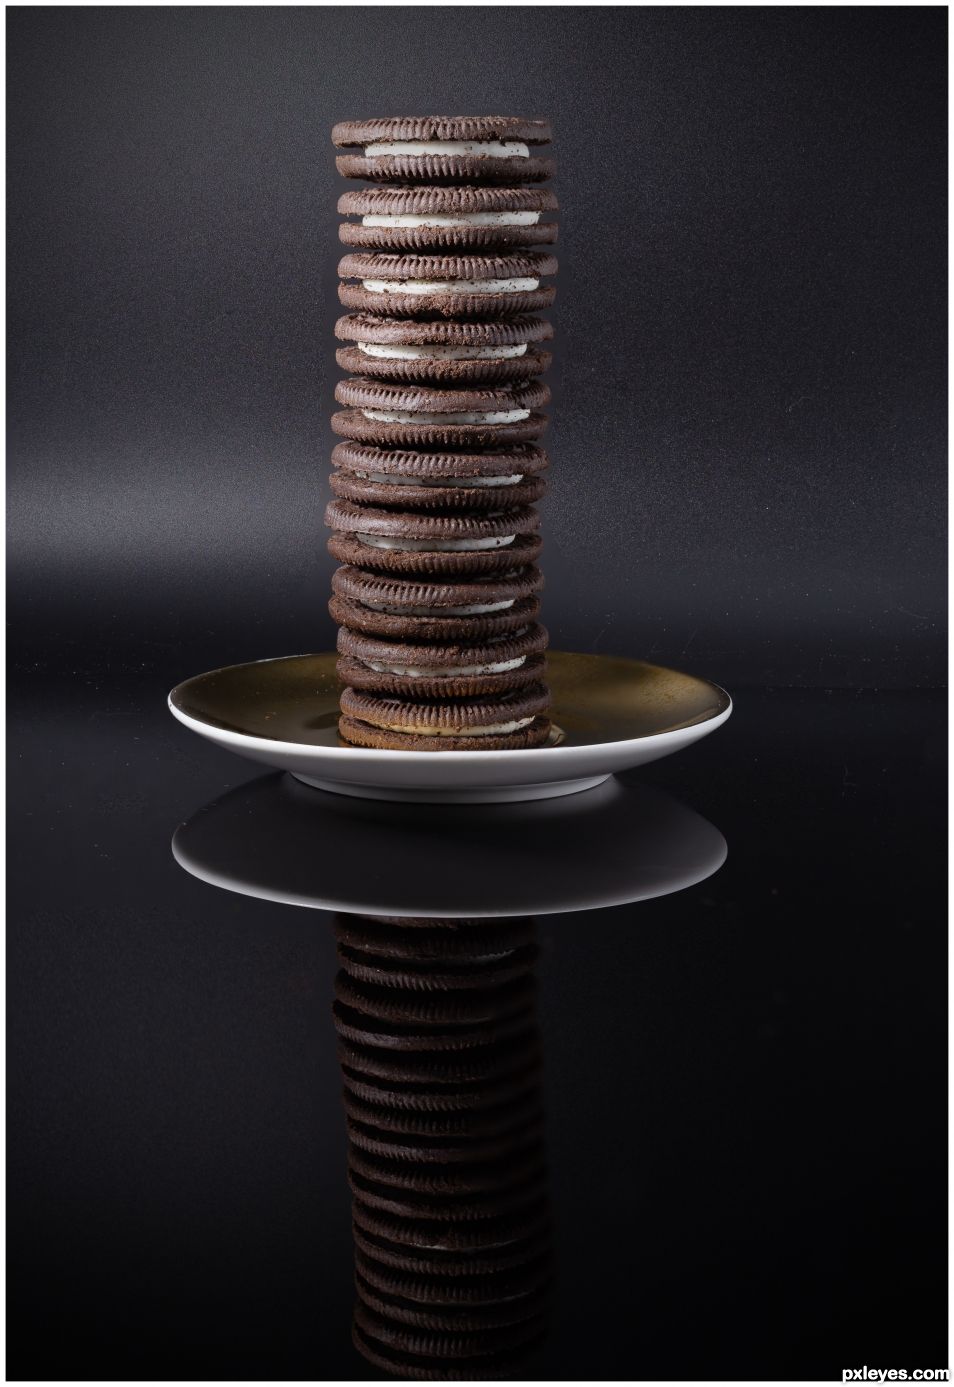 The Leaning Tower ot Oreo